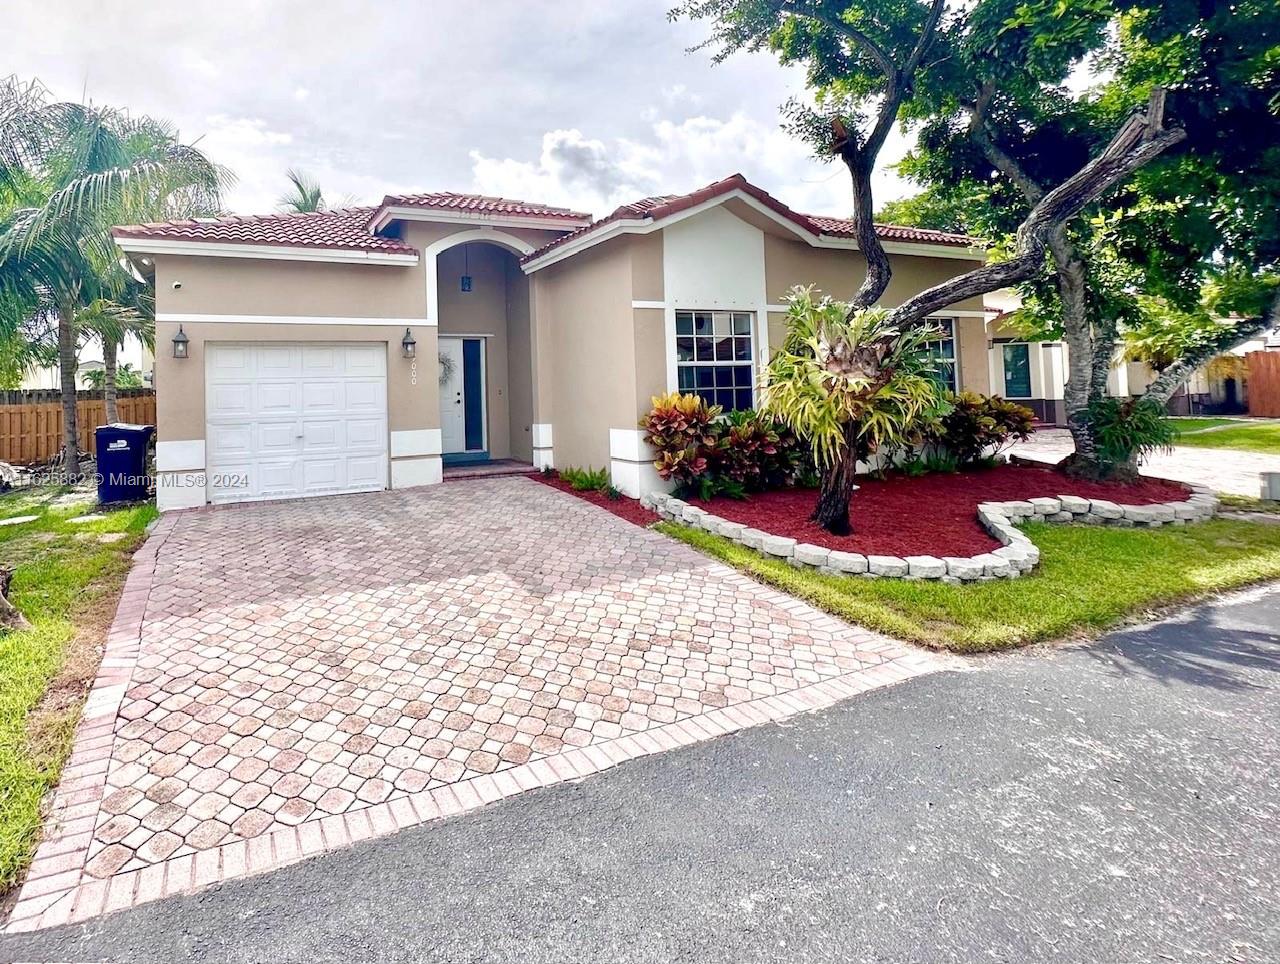 Great opportunity!!! Amazing 3 bedroom, 2 bathroom single family home located in the heart of Cutler Bay. Renovations done with all high end finishes and great attention to detail. This home features cozy and spacious living room, wood plank tiles, bright and airy split bedroom floor plan.